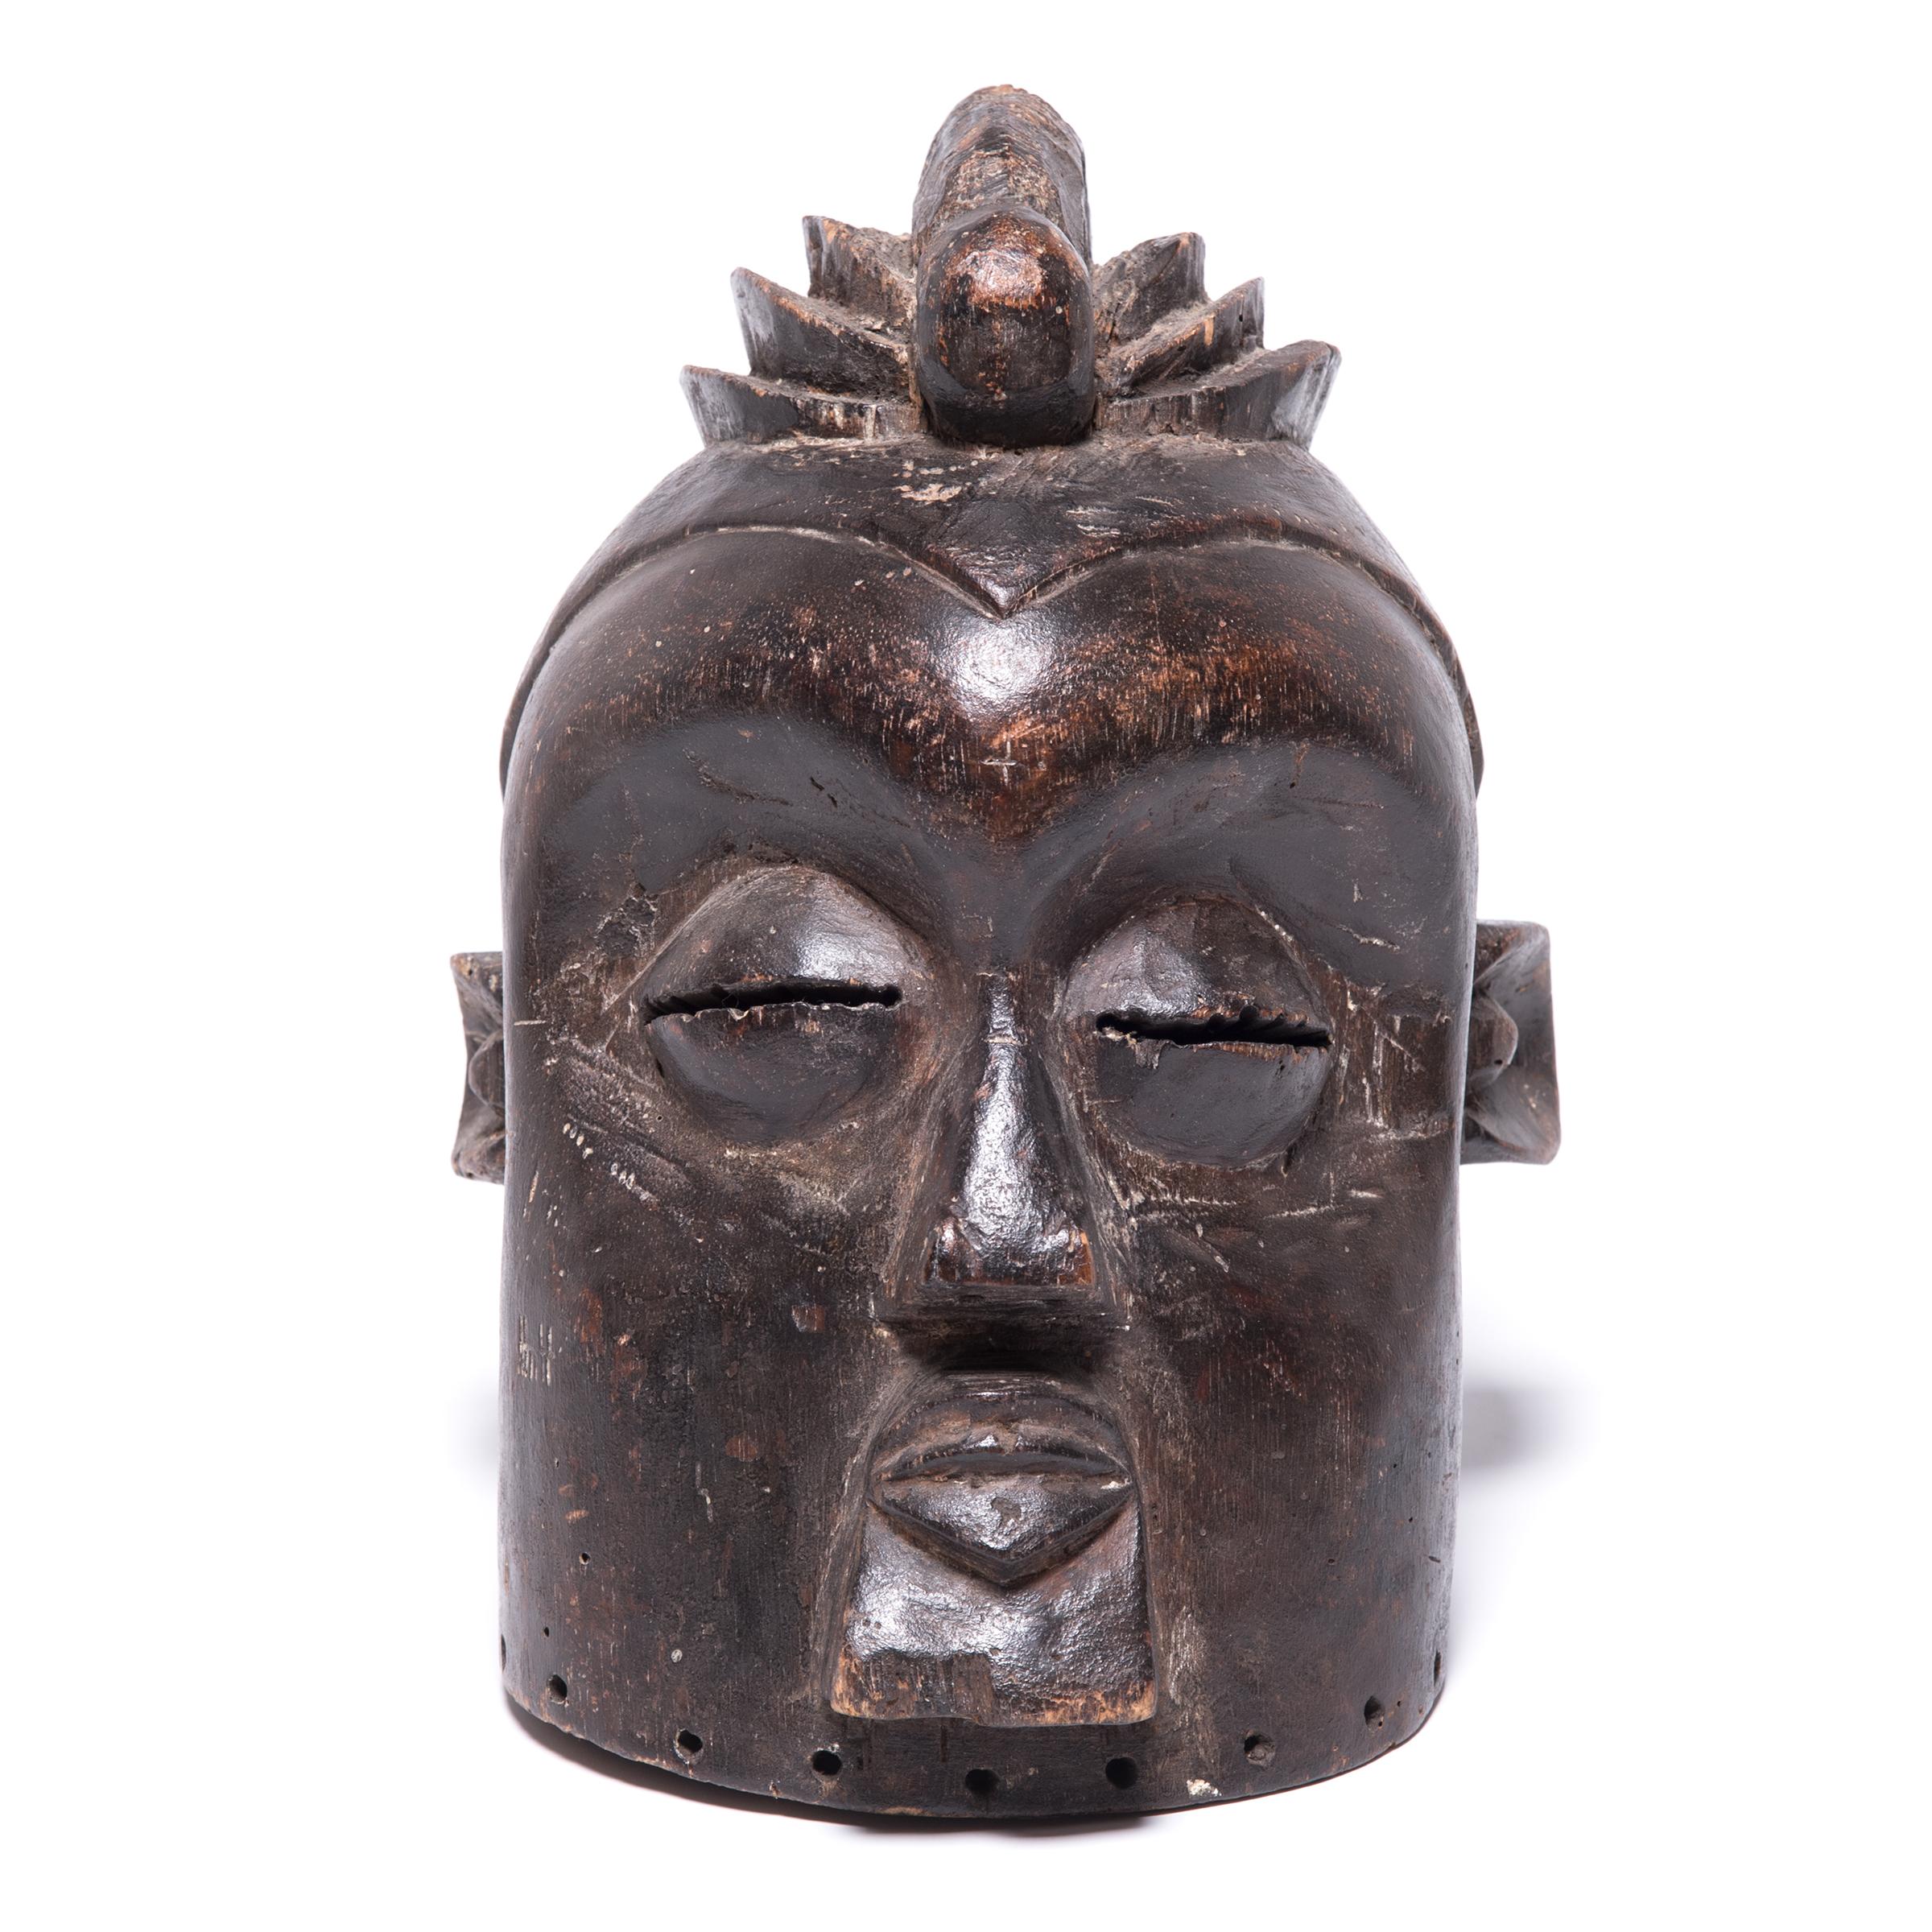 During their five hundred year history in the Southern Congo, the Basuku tribe developed a series of intricate rituals built around their skilled mask makers. This particular example was most likely carved in the likeness of a deceased chieftain.